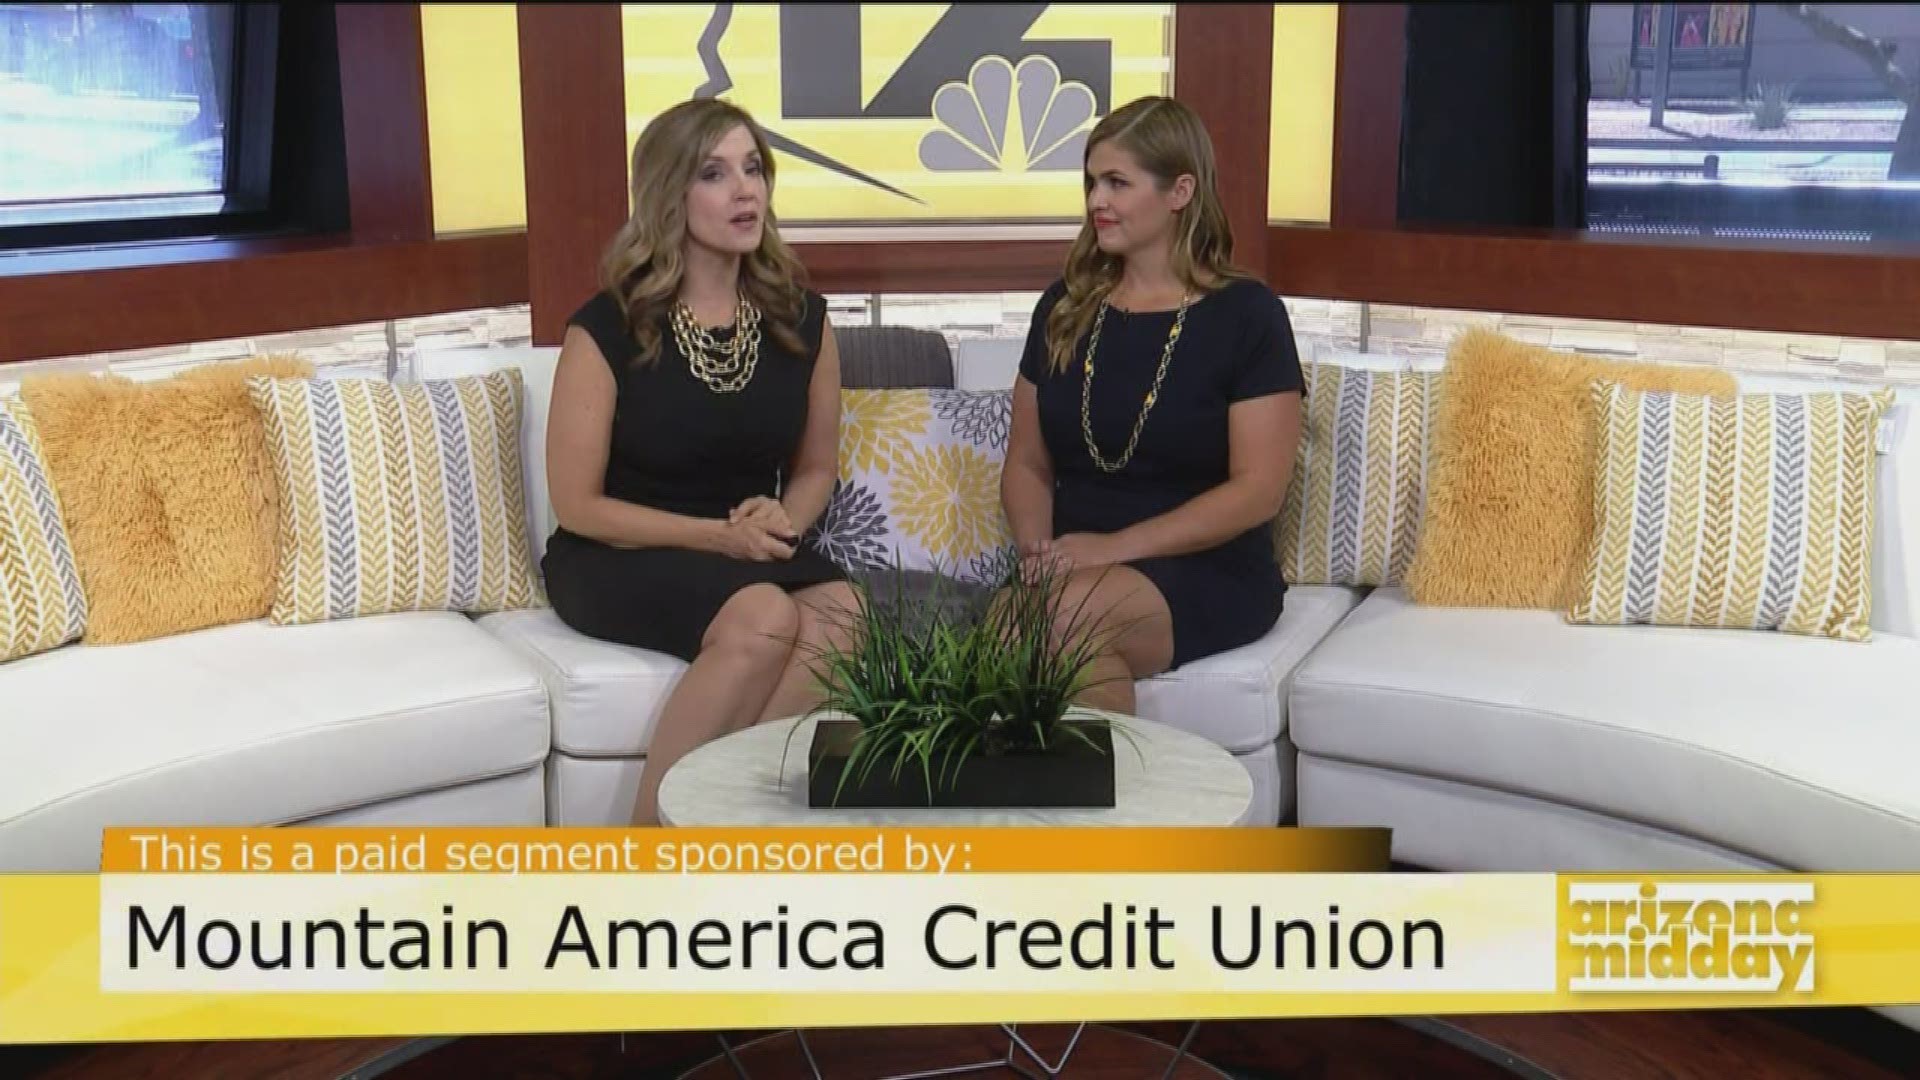 Angie Nelson from Mountain America Credit Union tells us how to use a rewards card responsibly and how we can improve our credit score with helpful tips.